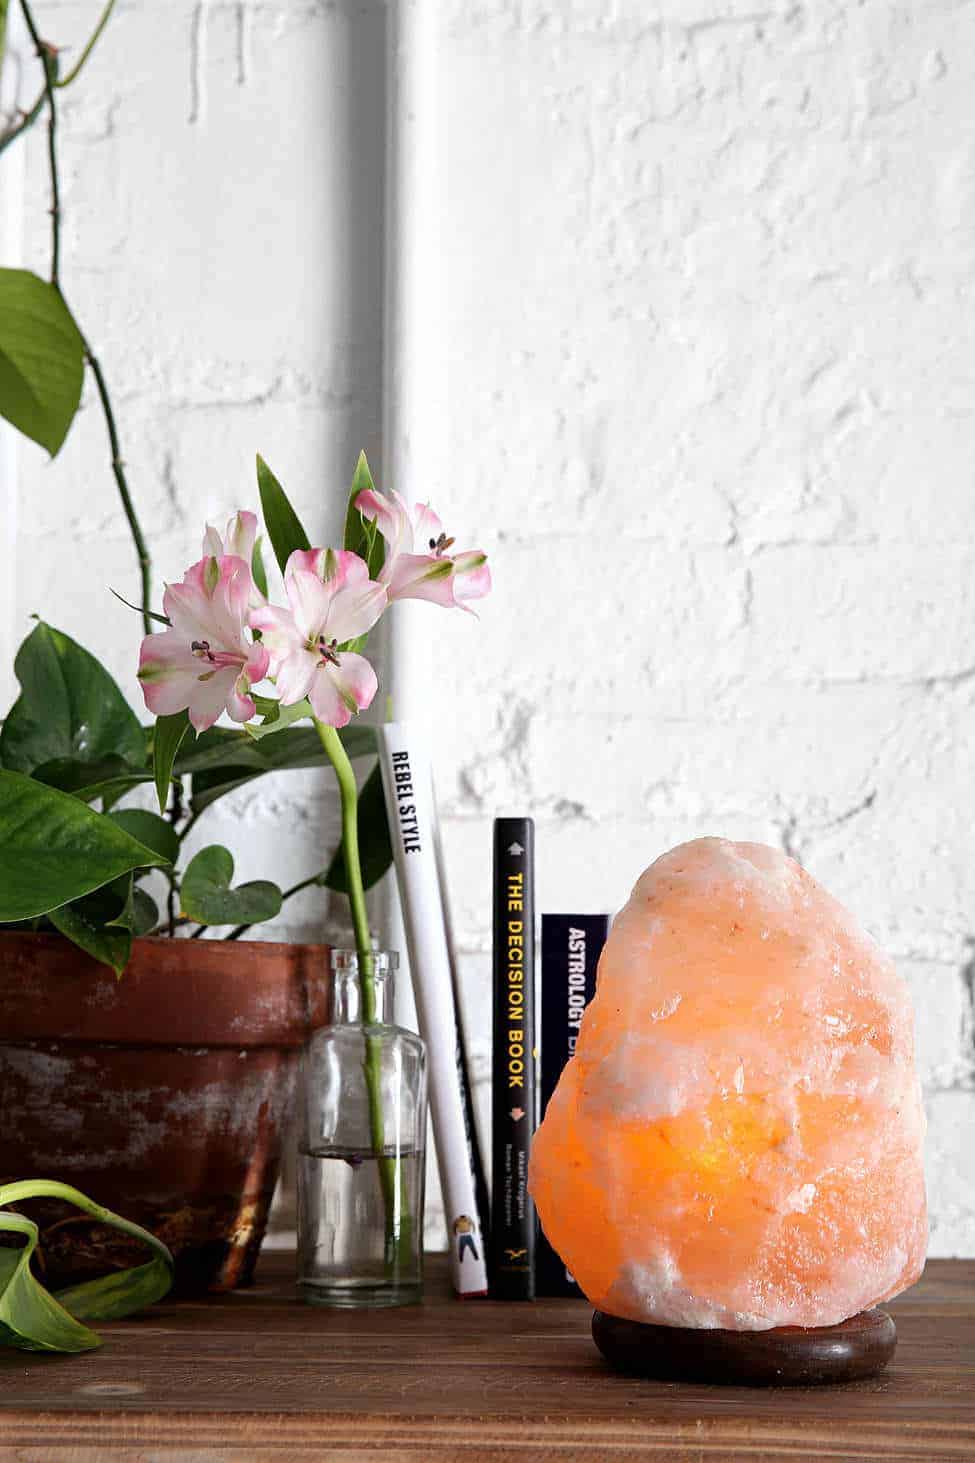 7 Things To Know About Buying a Salt Lamp